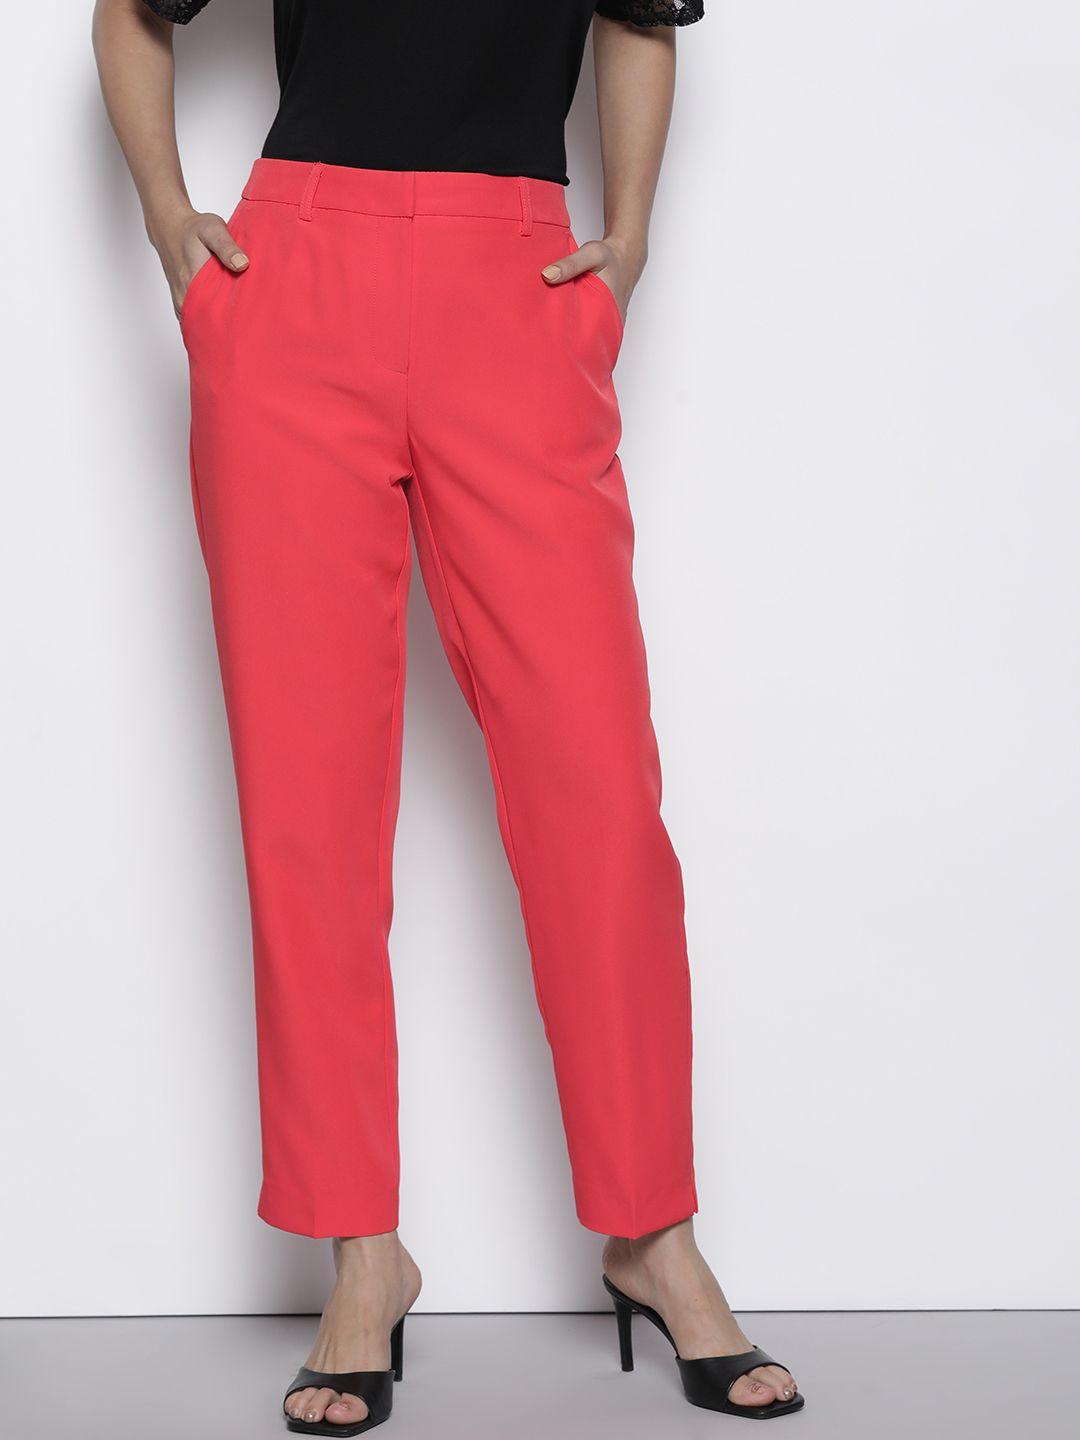 dorothy perkins women ankle-length trousers